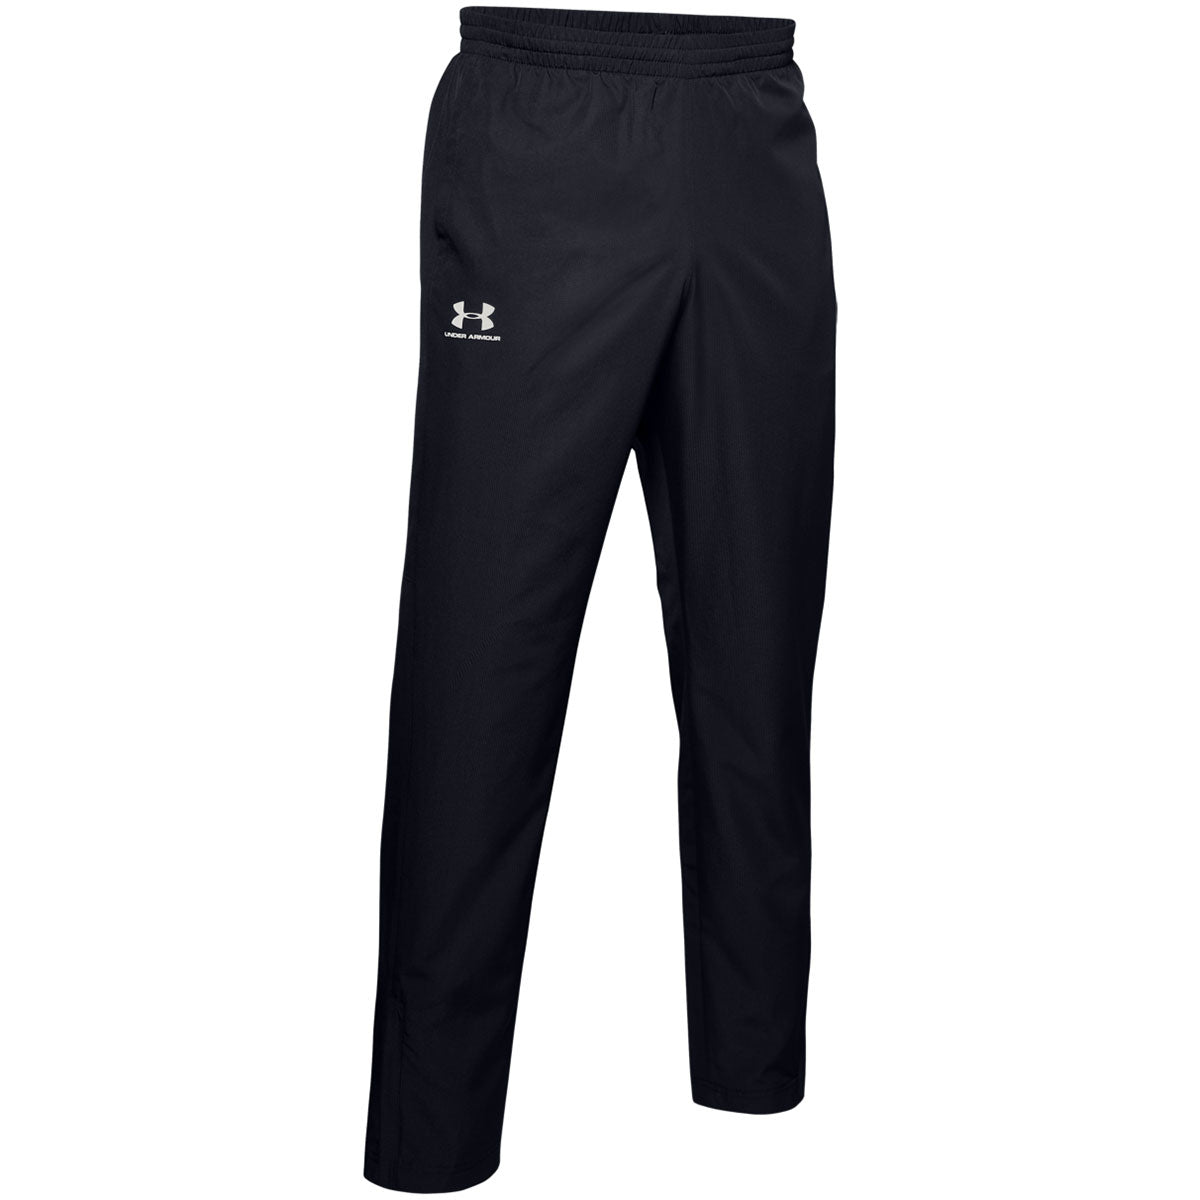 Under Armour Rush Men's Fitted Pants in Gray for Men